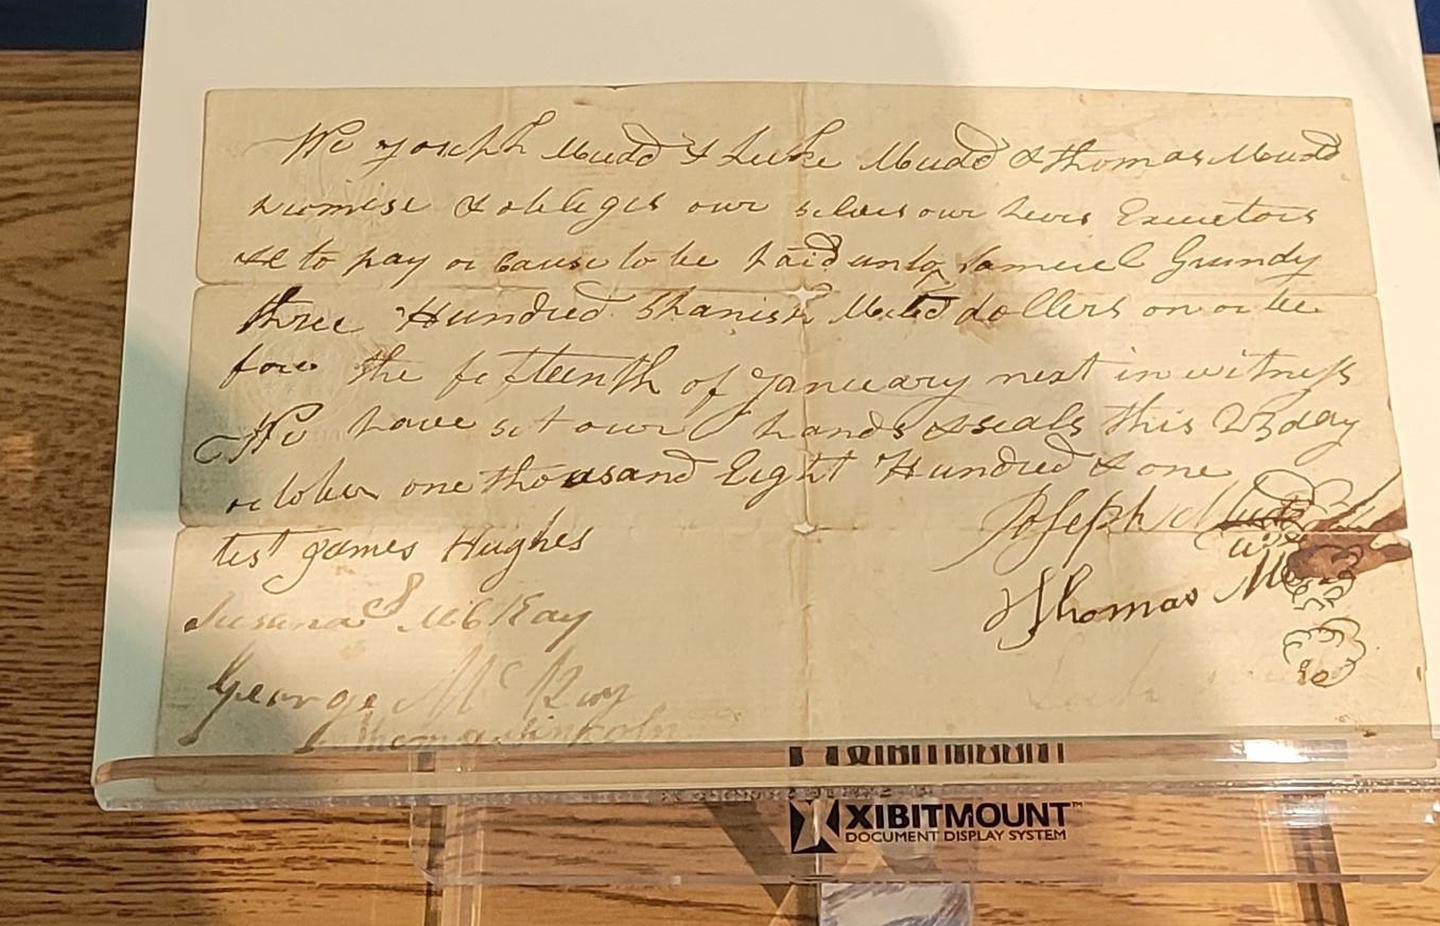 1801 Promissory Note1801 promissory note signed by Joseph, Thomas Lincoln, and Luke Mudd in favor of Samuel Grundy for 300 Spanish milled dollars. Luke Mudd  cousin to Dr. Samuel Mudd, one of the Lincoln Assassination conspirators.